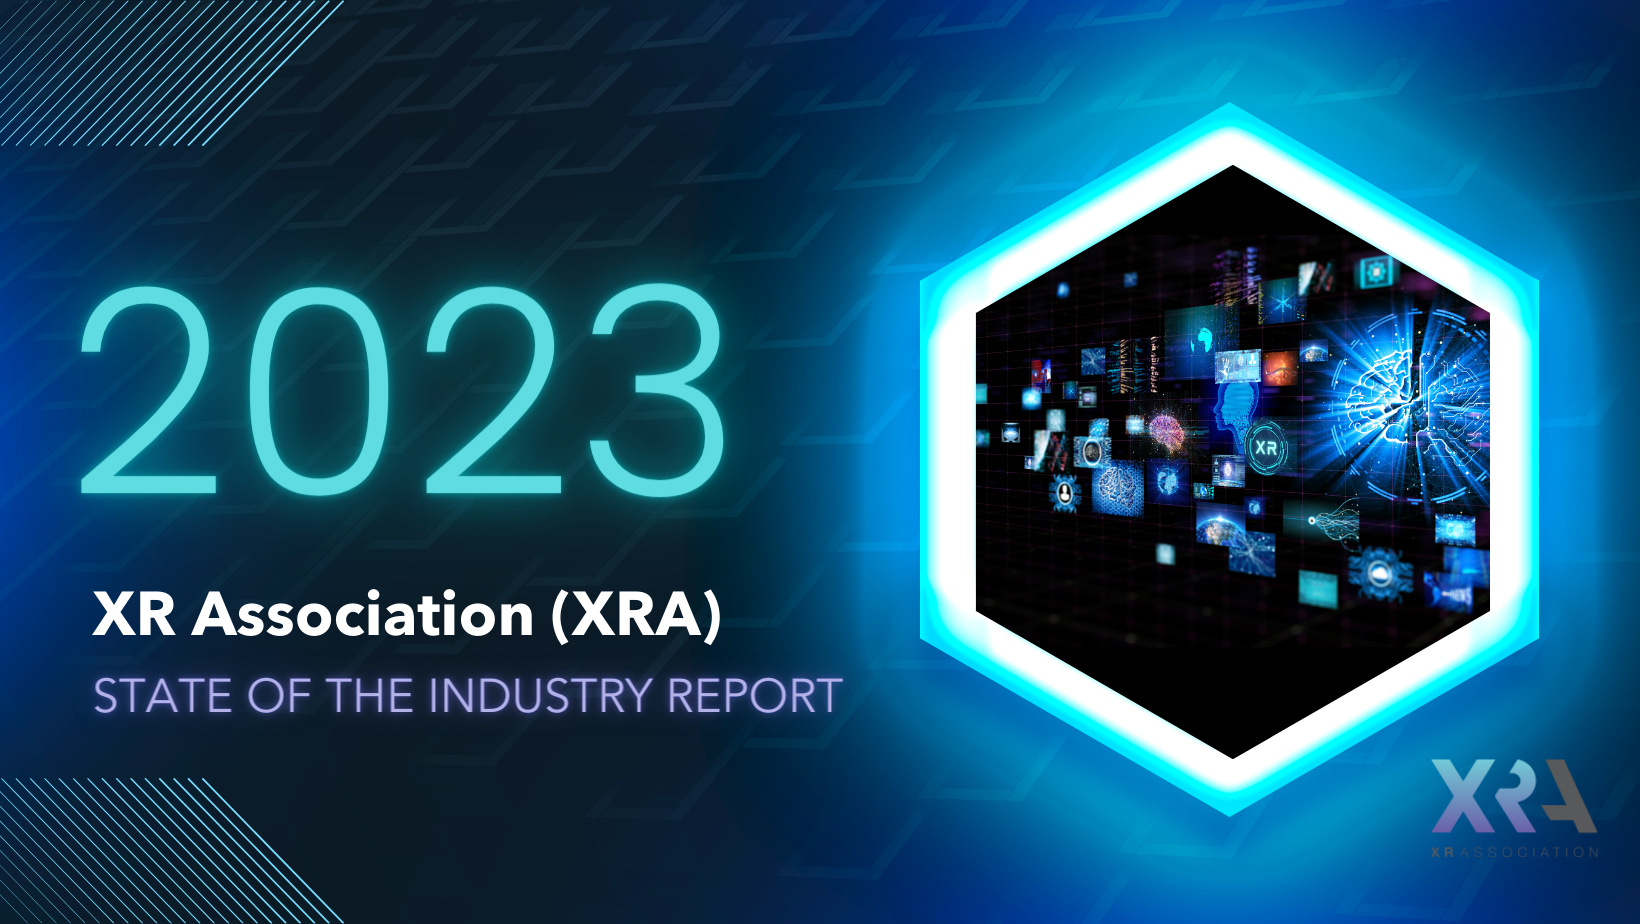 XR ASSOCIATION RELEASES “STATE OF THE INDUSTRY REPORT,” OFFERING REFLECTIONS ON 2023 AND A LOOK AHEAD TO 2024